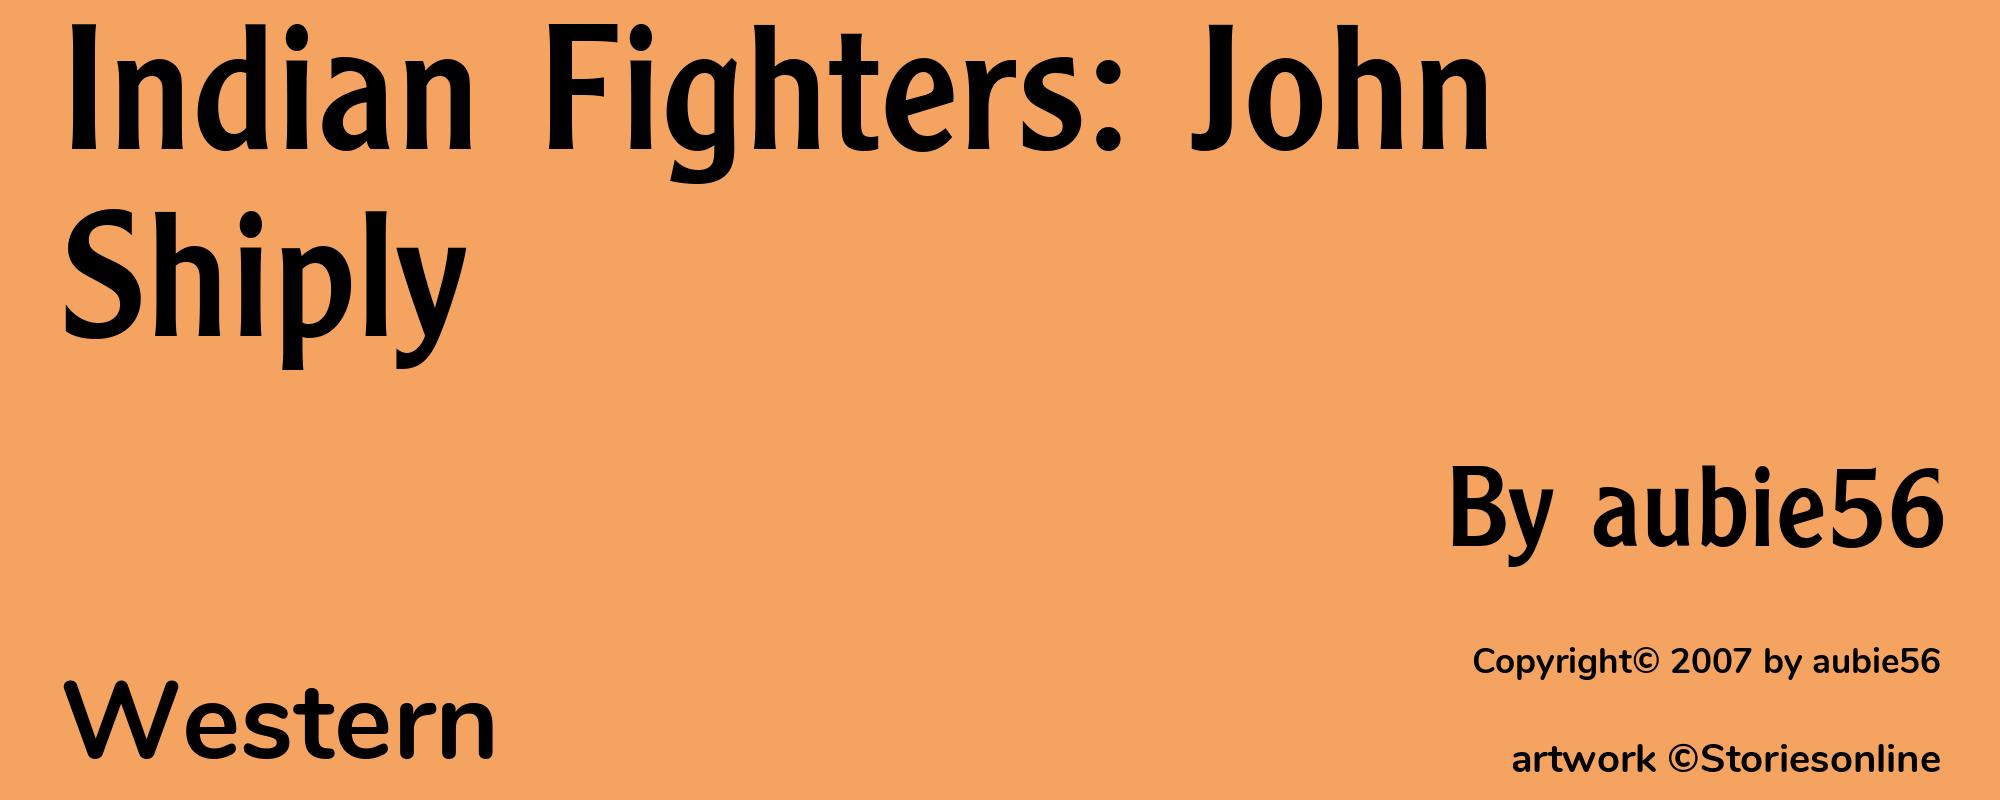 Indian Fighters: John Shiply - Cover